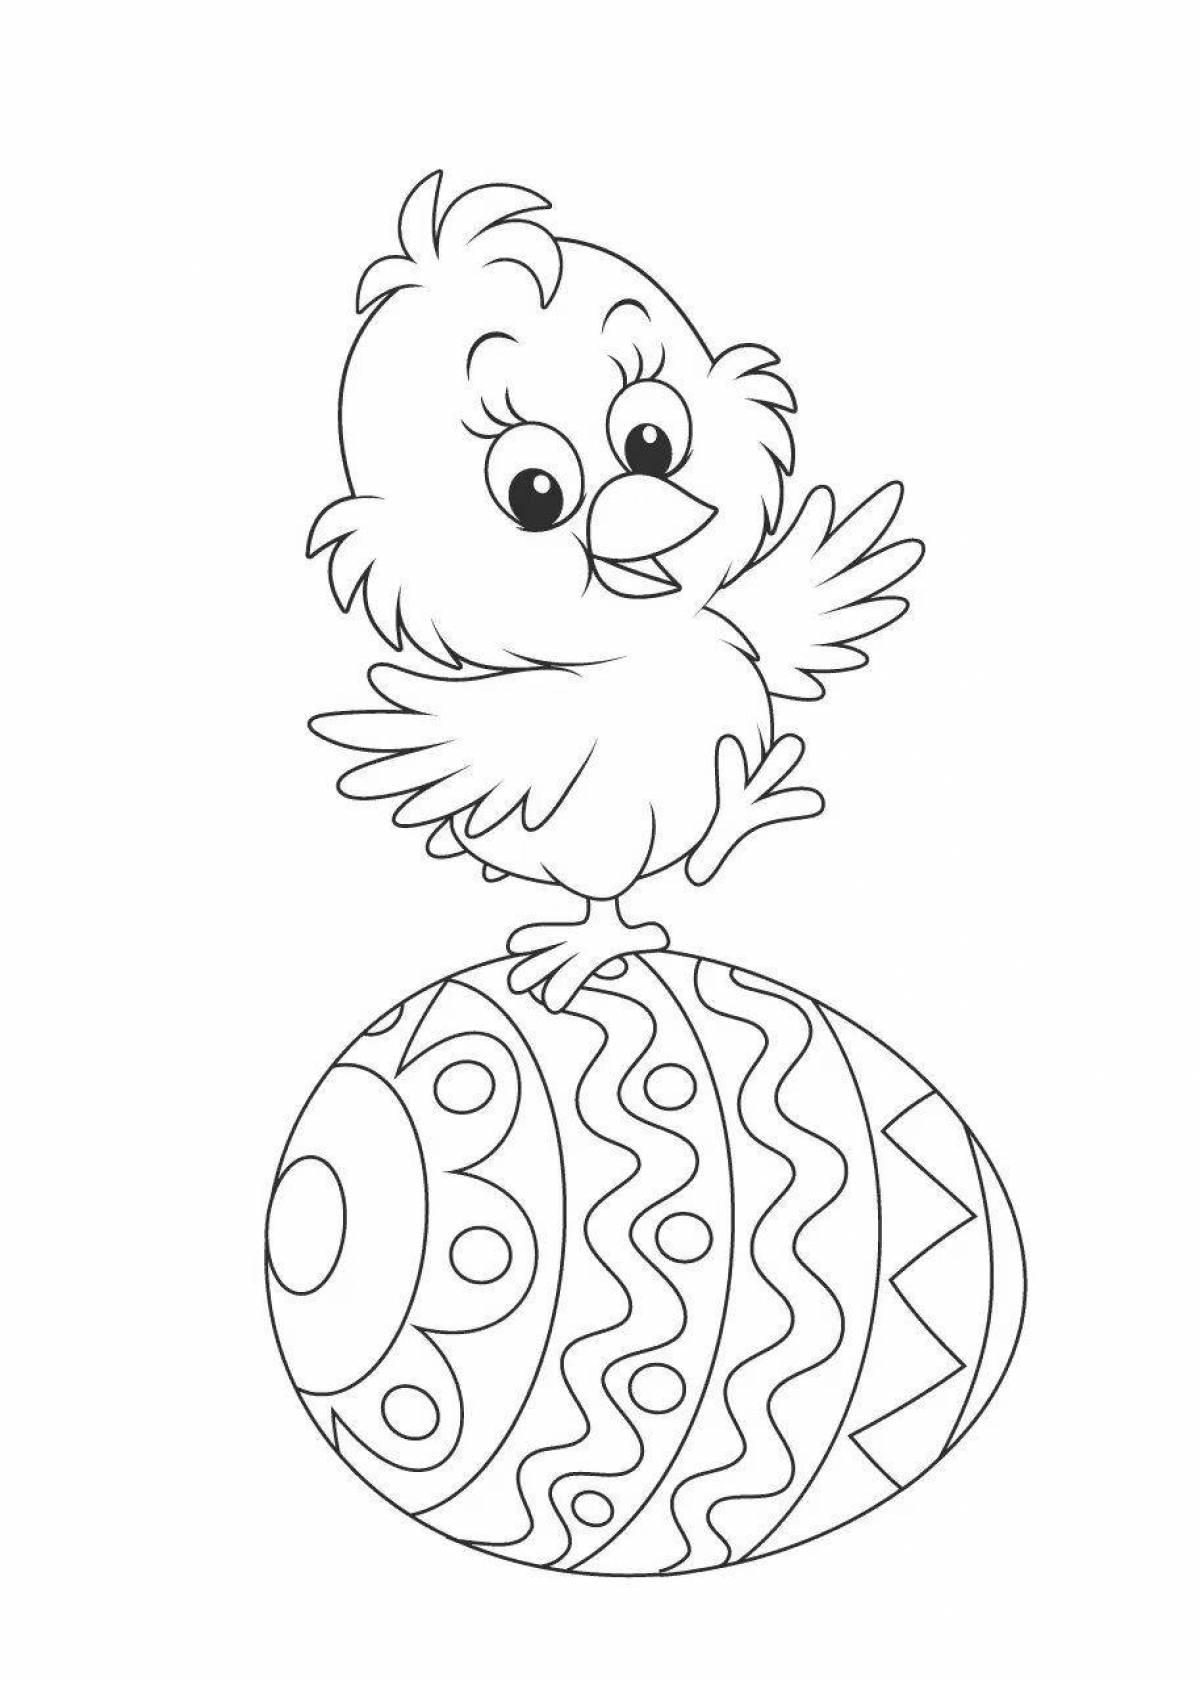 Coloring page nice chick in egg